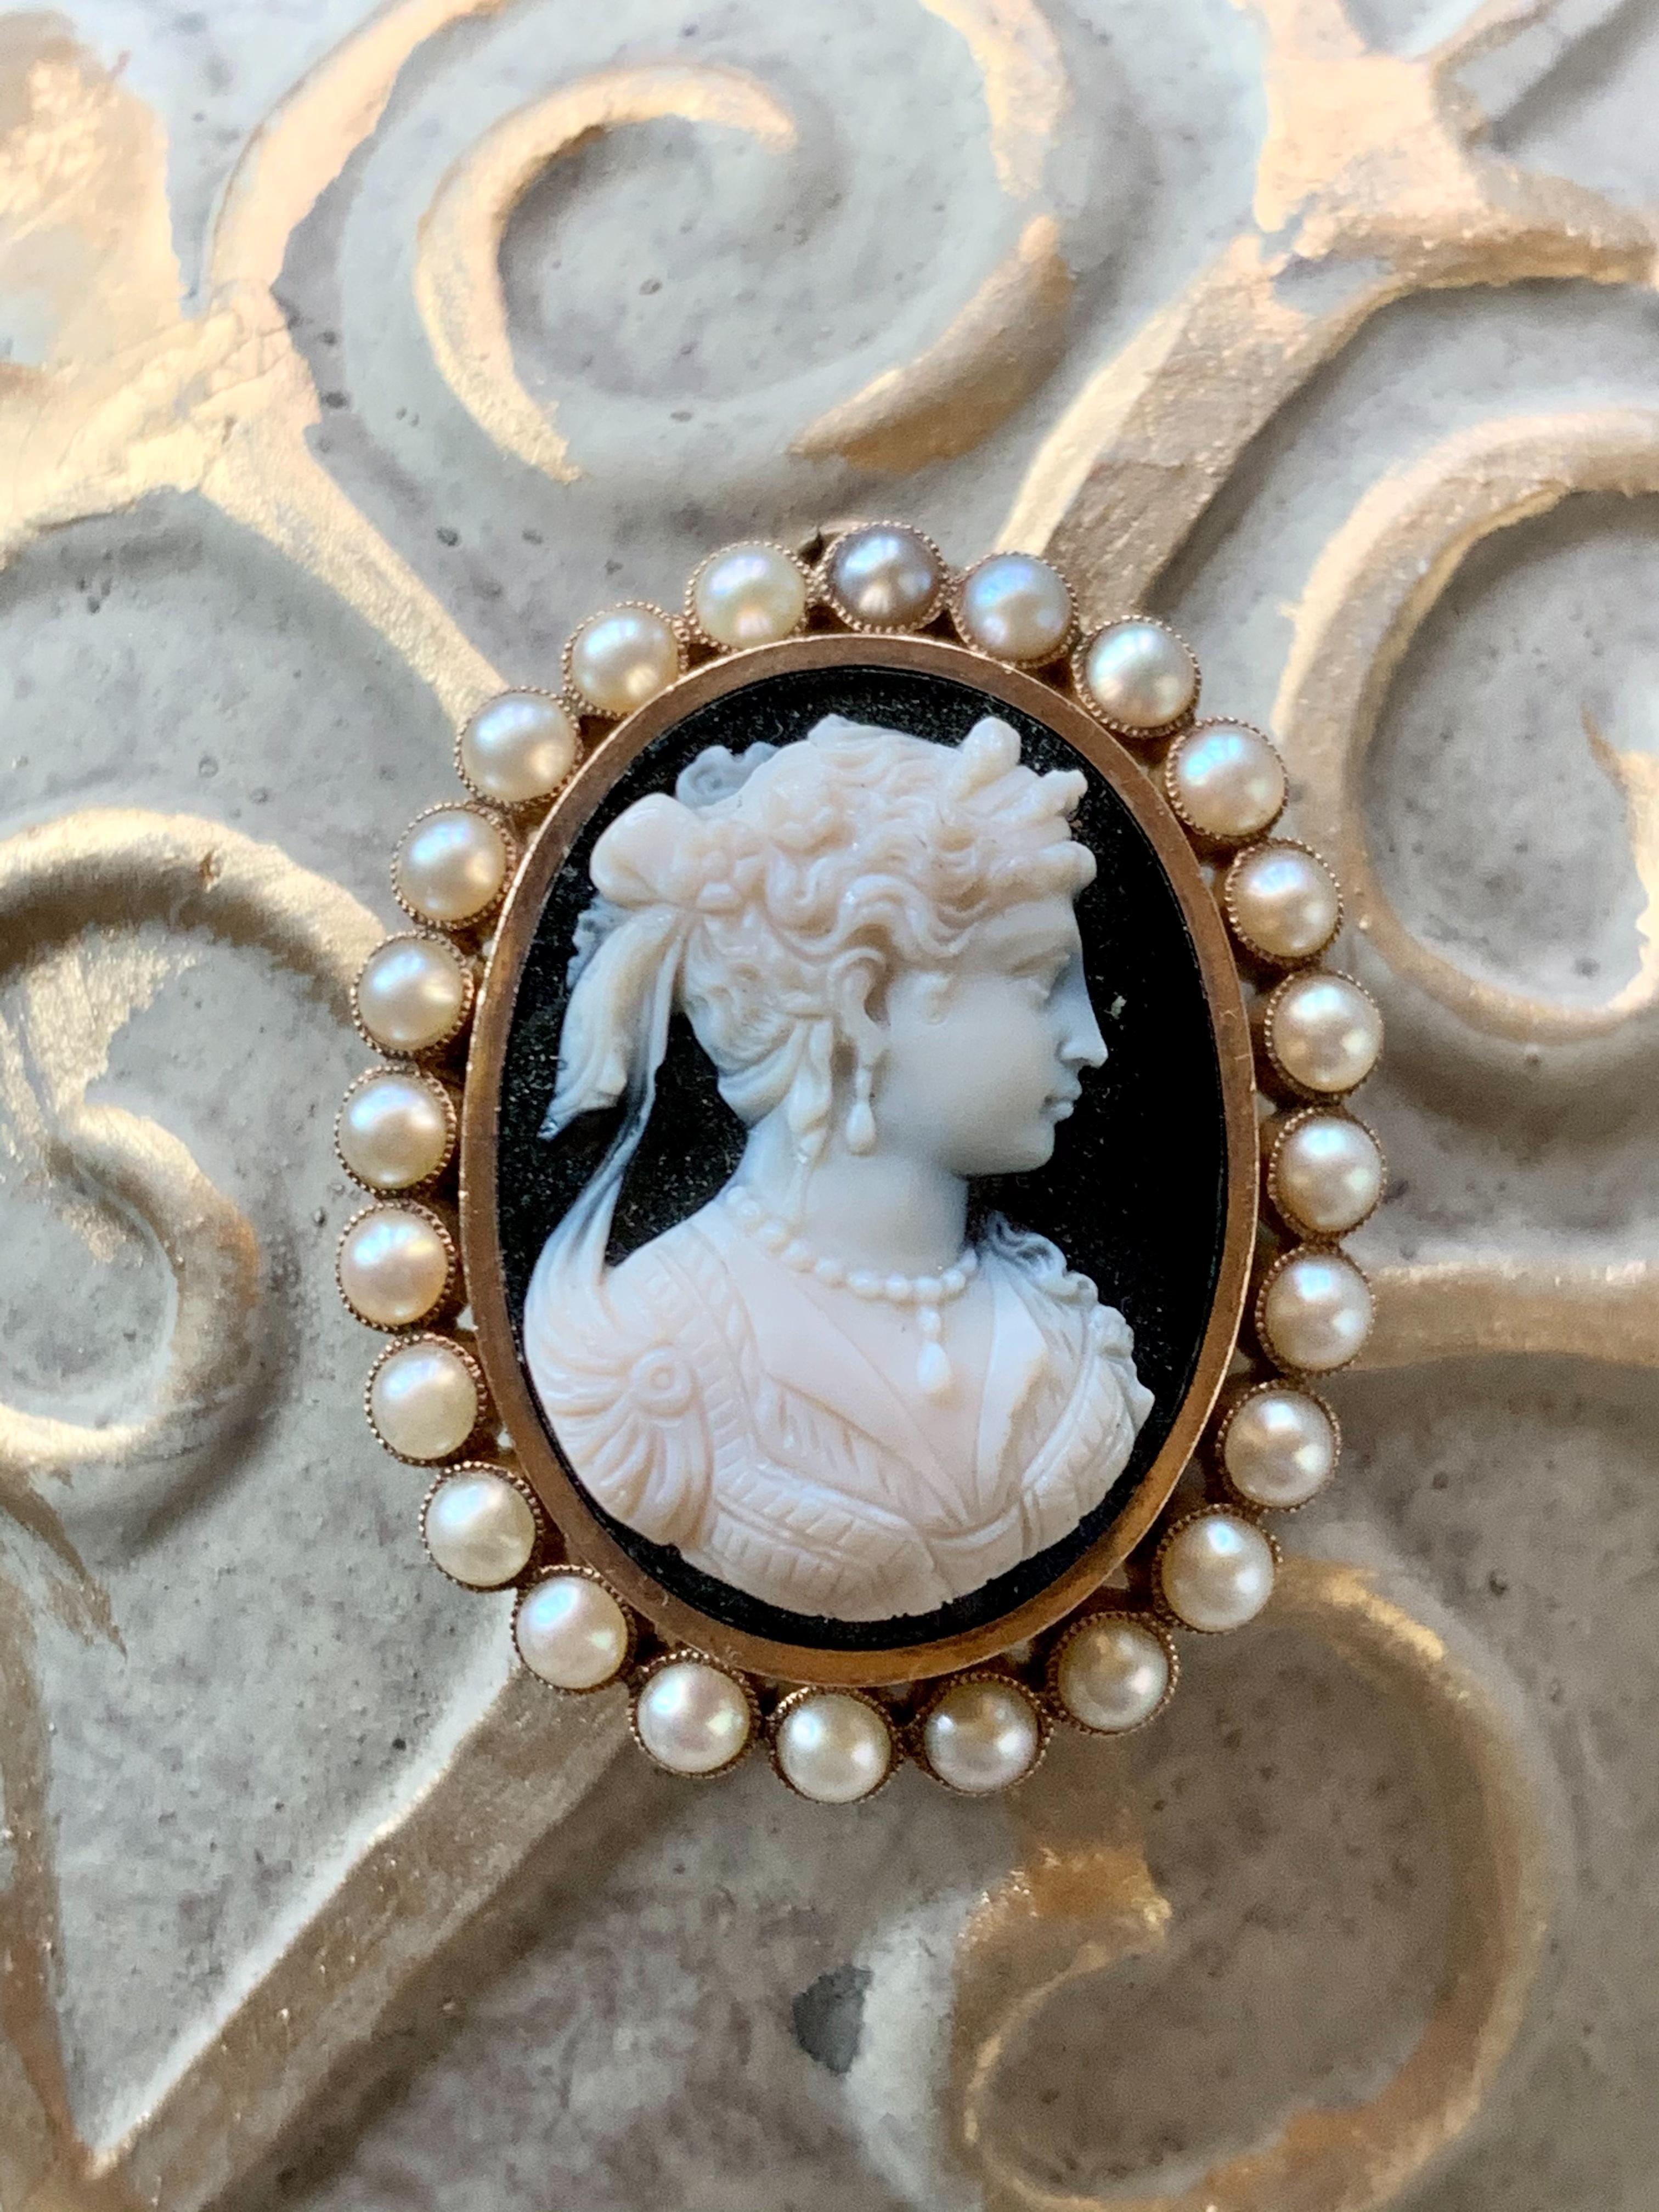 This absolutely fabulous Cameo is carved in black and white stone and features a halo of 24-4mm Pearls. 

The Cameo can be worn as a brooch or a pendant.  Closure is in good working order.

There is no stamp.

Size:  approximately 1 1/2